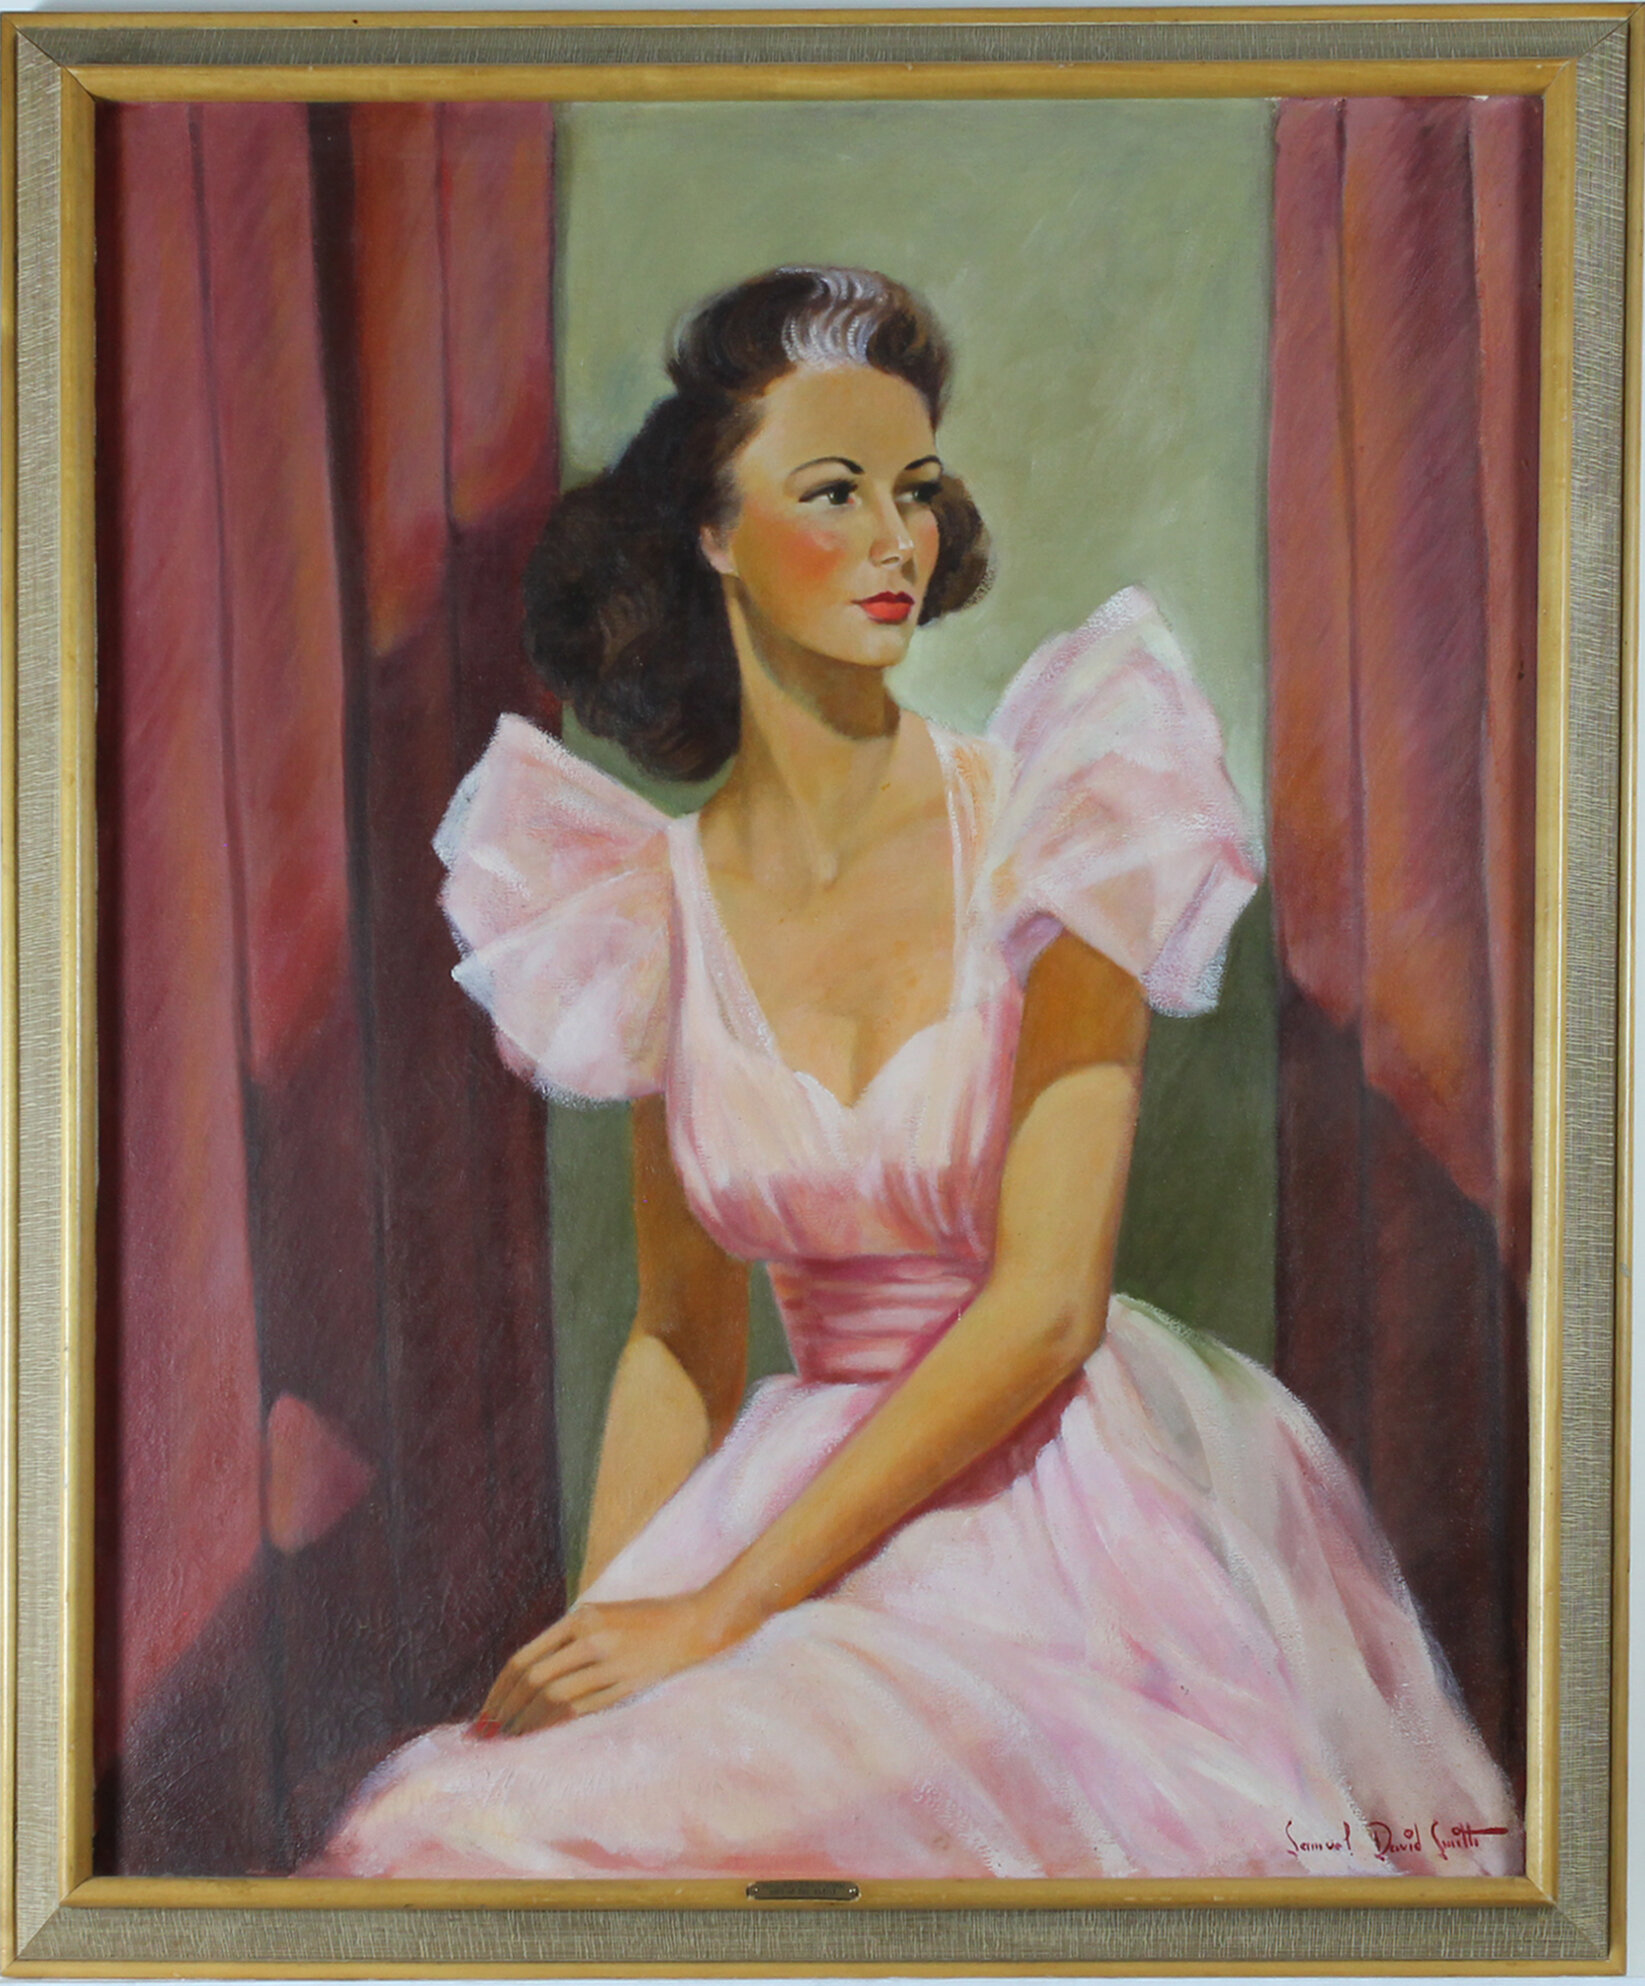 Corporal Samuel David Smith, Miss Beverly Kirk, n.d., oil on canvas Collection of The Grace Museum, Gift of the artist